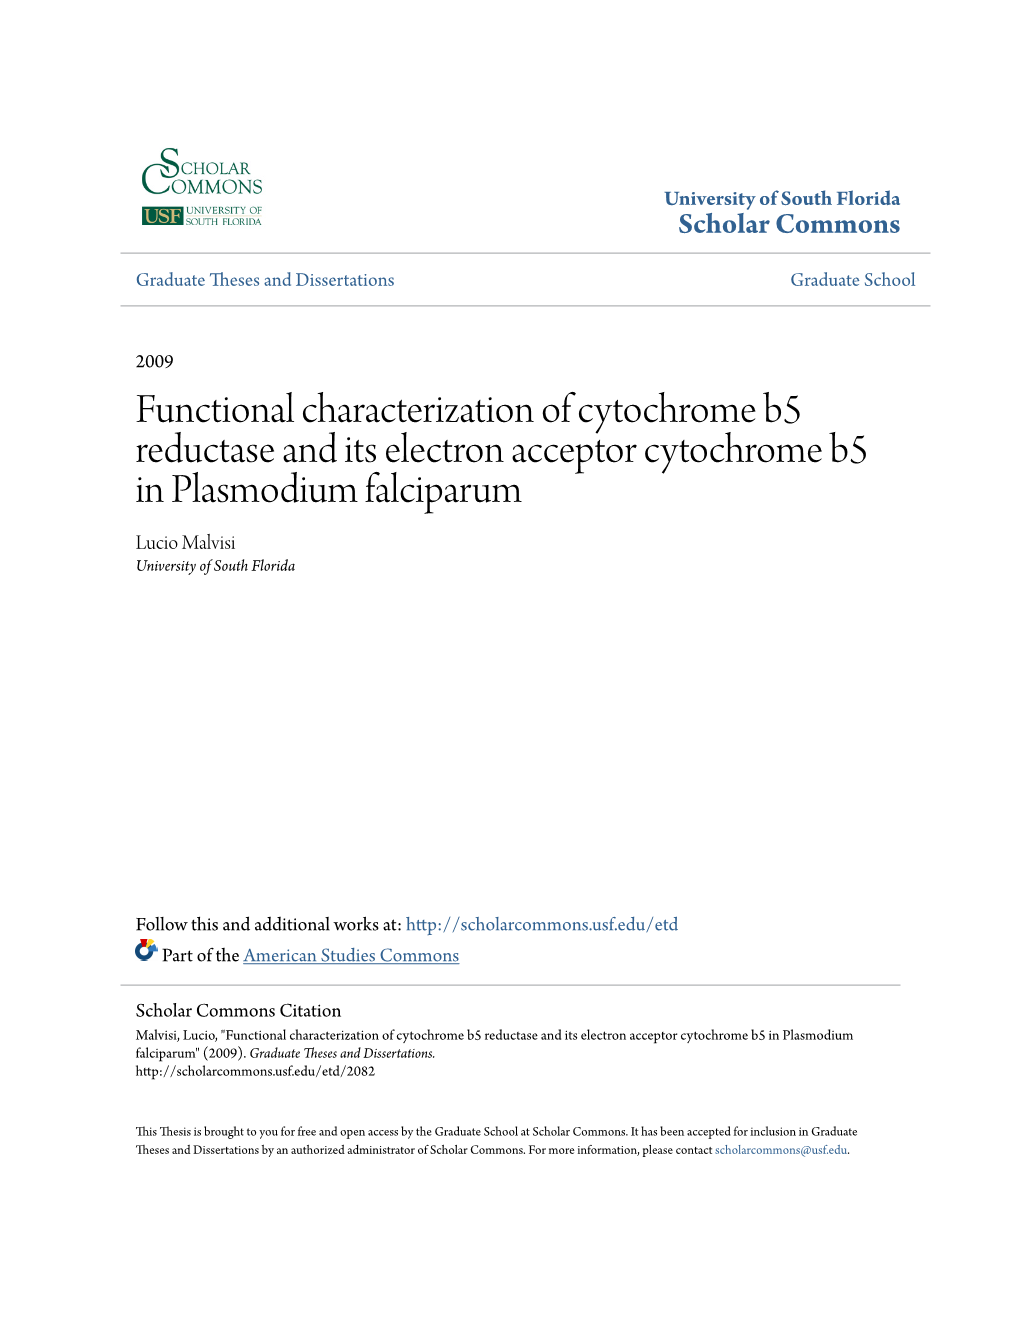 Functional Characterization of Cytochrome B5 Reductase and Its Electron Acceptor Cytochrome B5 in Plasmodium Falciparum Lucio Malvisi University of South Florida